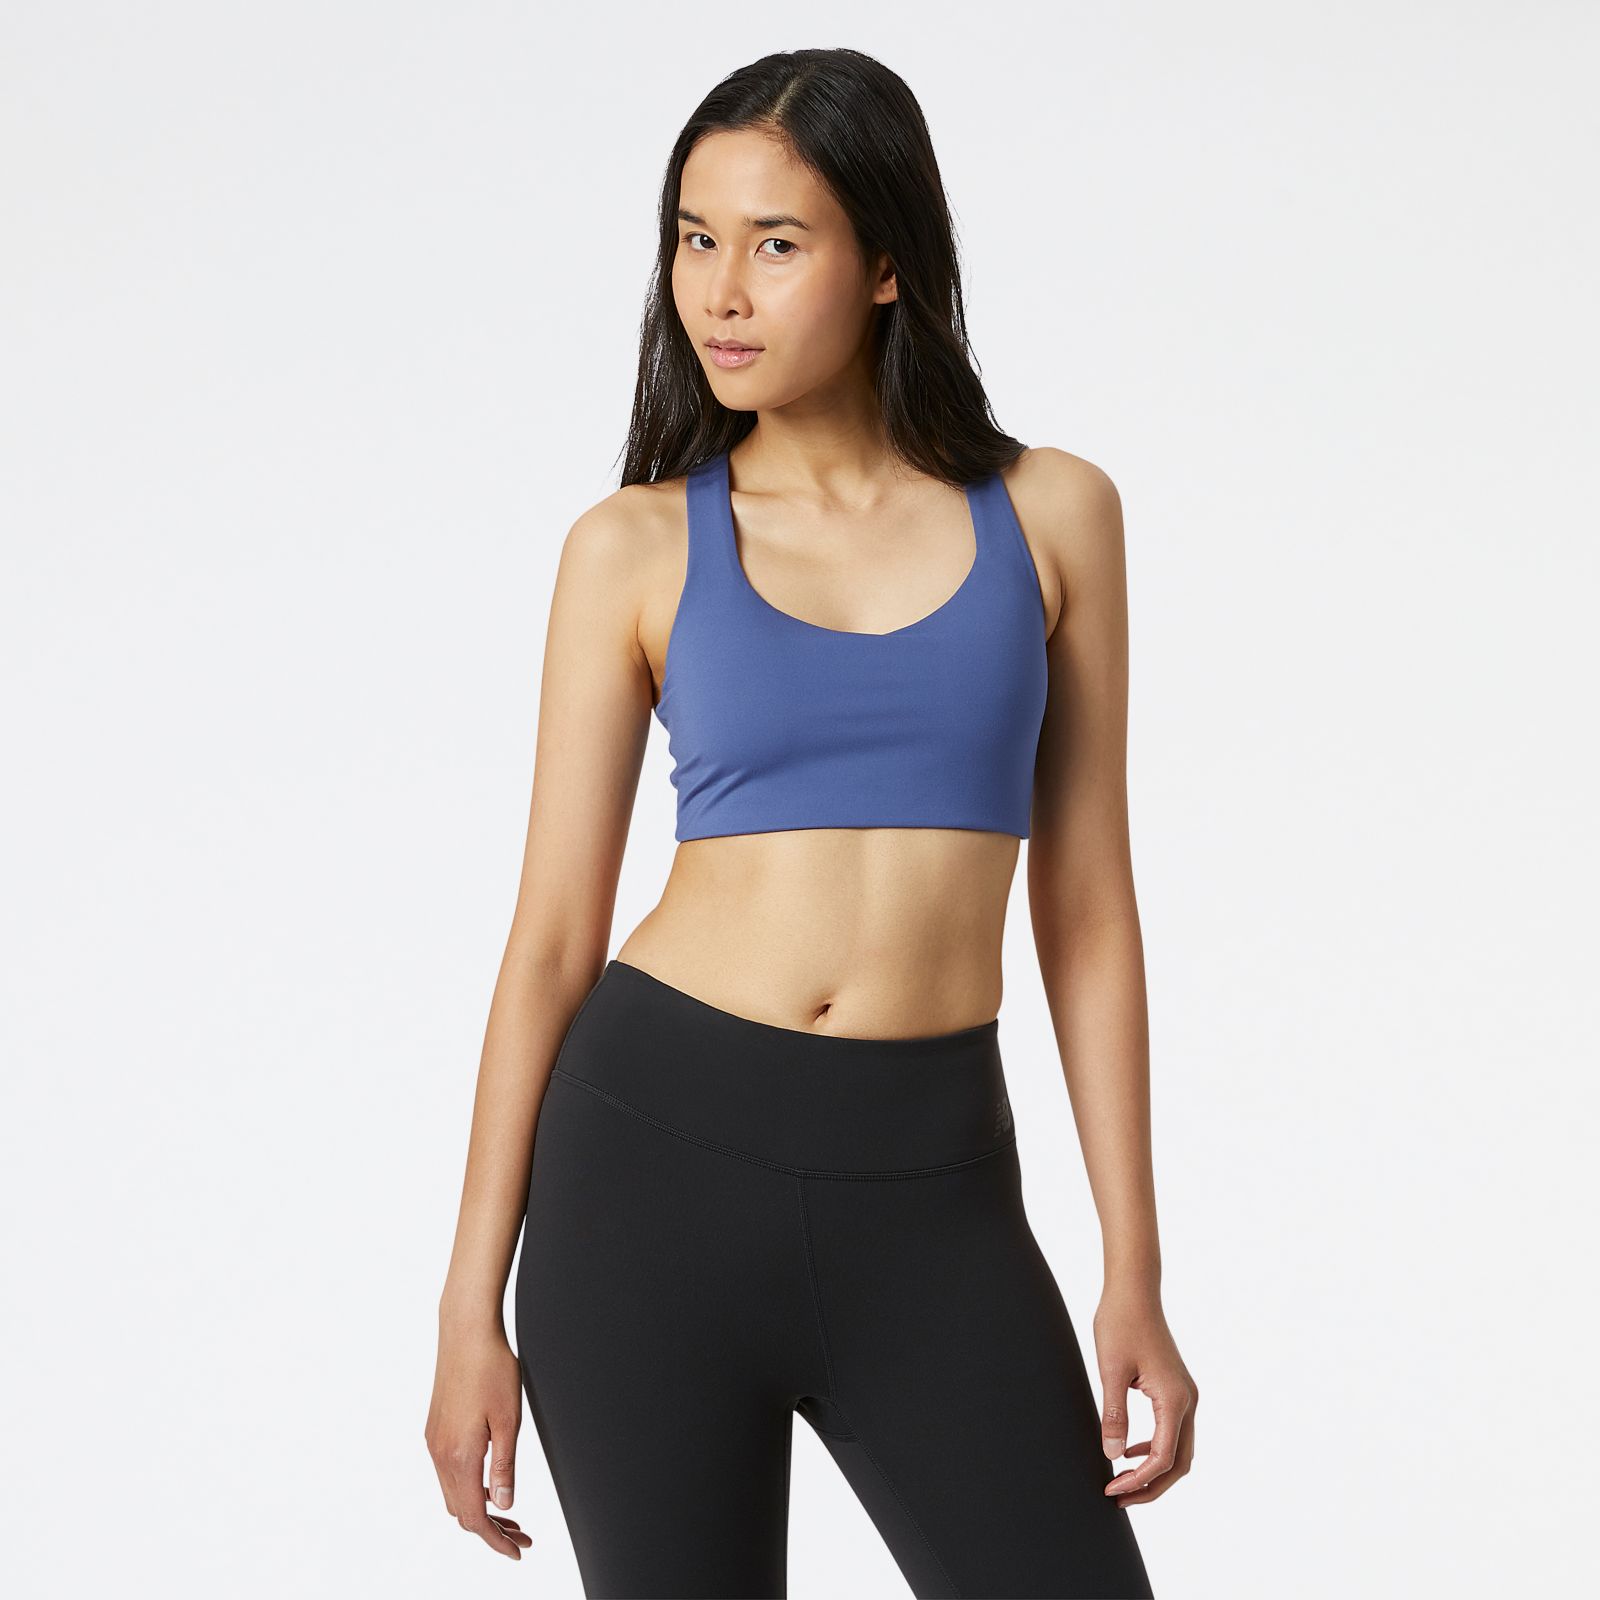 New Year, New Label: Balance Athletica Expands Fast-Growing DTC Business  With Debut Fashion Sublabel, Vitality x Balance